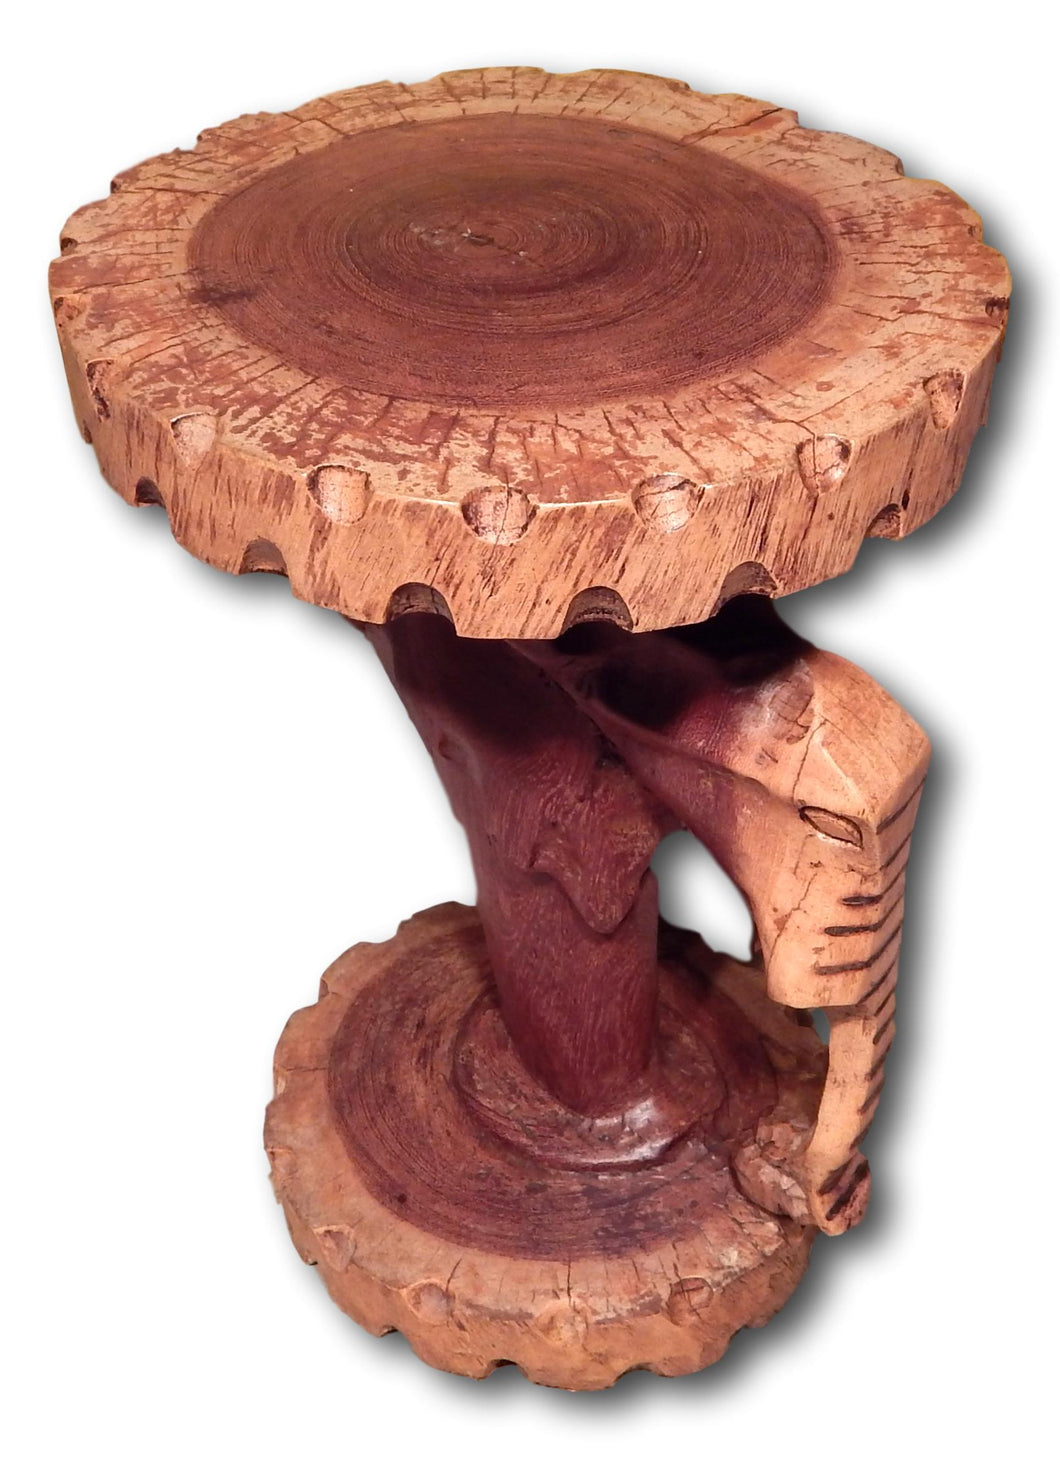 Teak wood End Table by Roots Cabinets & Tiles for solid teak end tables, teak side tables, teak coffee tables, teak root tables, salvaged teak coffee tables, teak root end tables